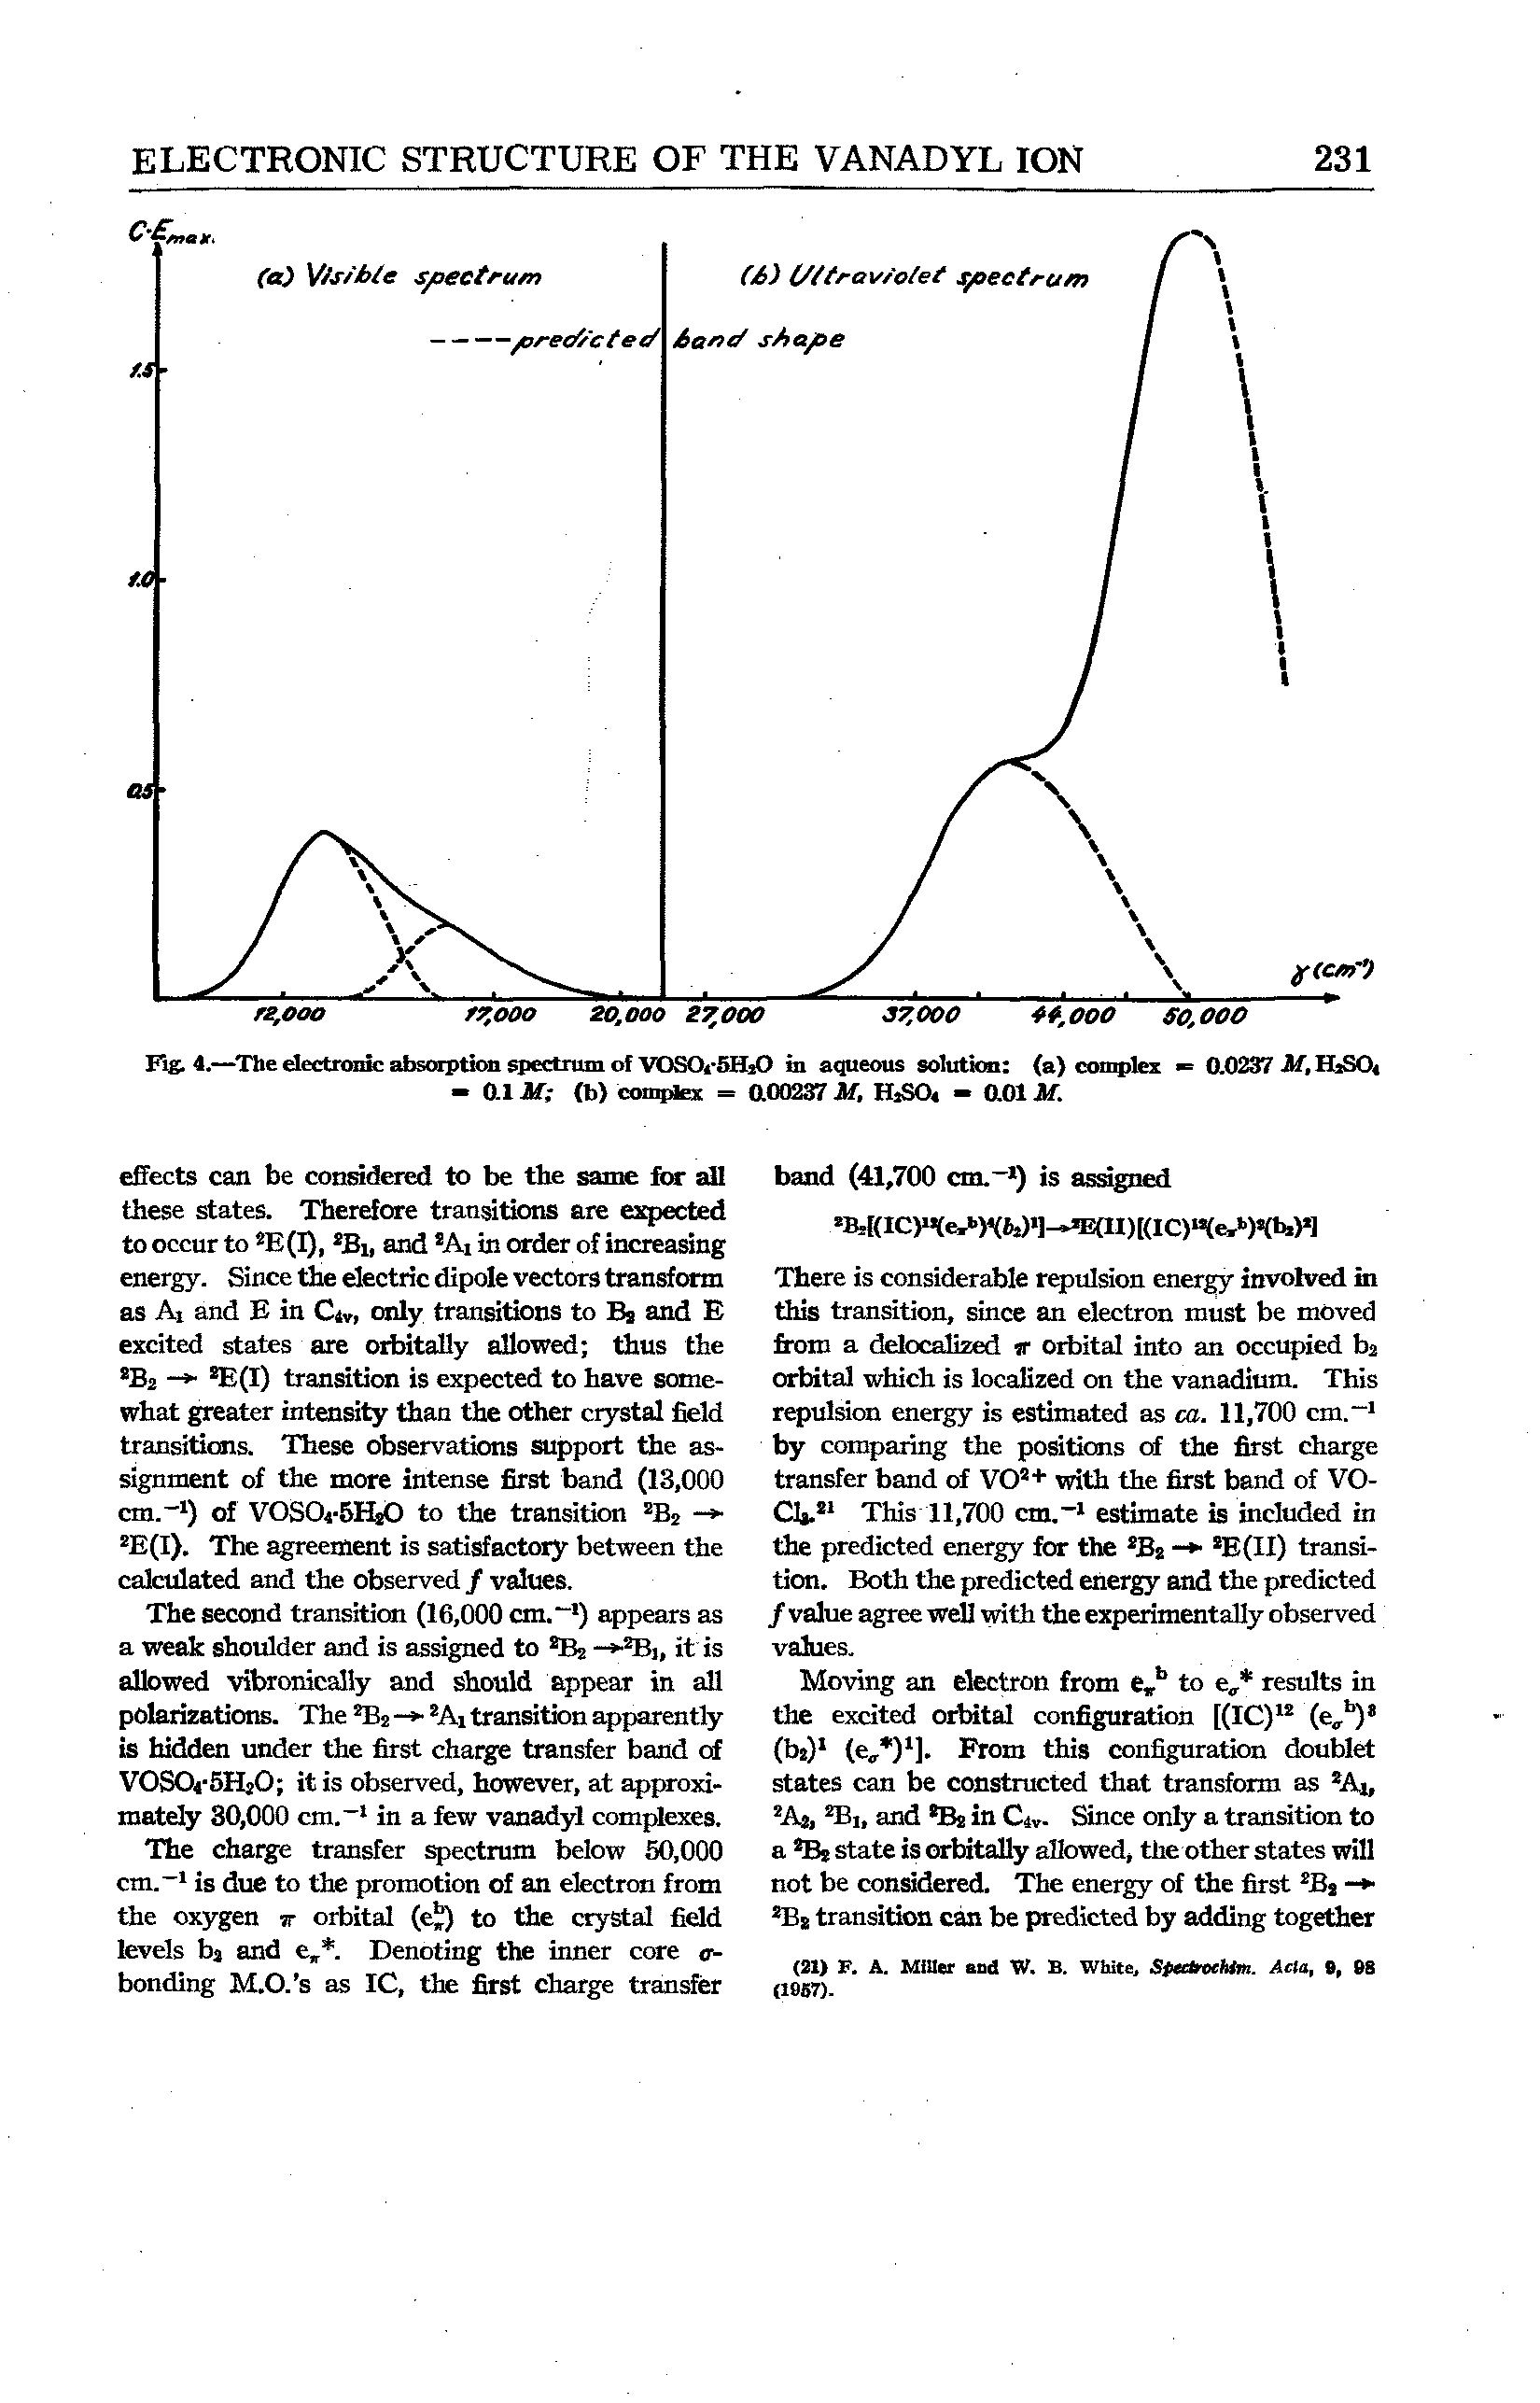 Fig. 4.—The electronic absorption spectrum of VOSOrSHsO in aqueous solution (a) complex = 0.0237 M, HsSO - 0.1 M (b) complex = 000237 M, HjSO - O01M.